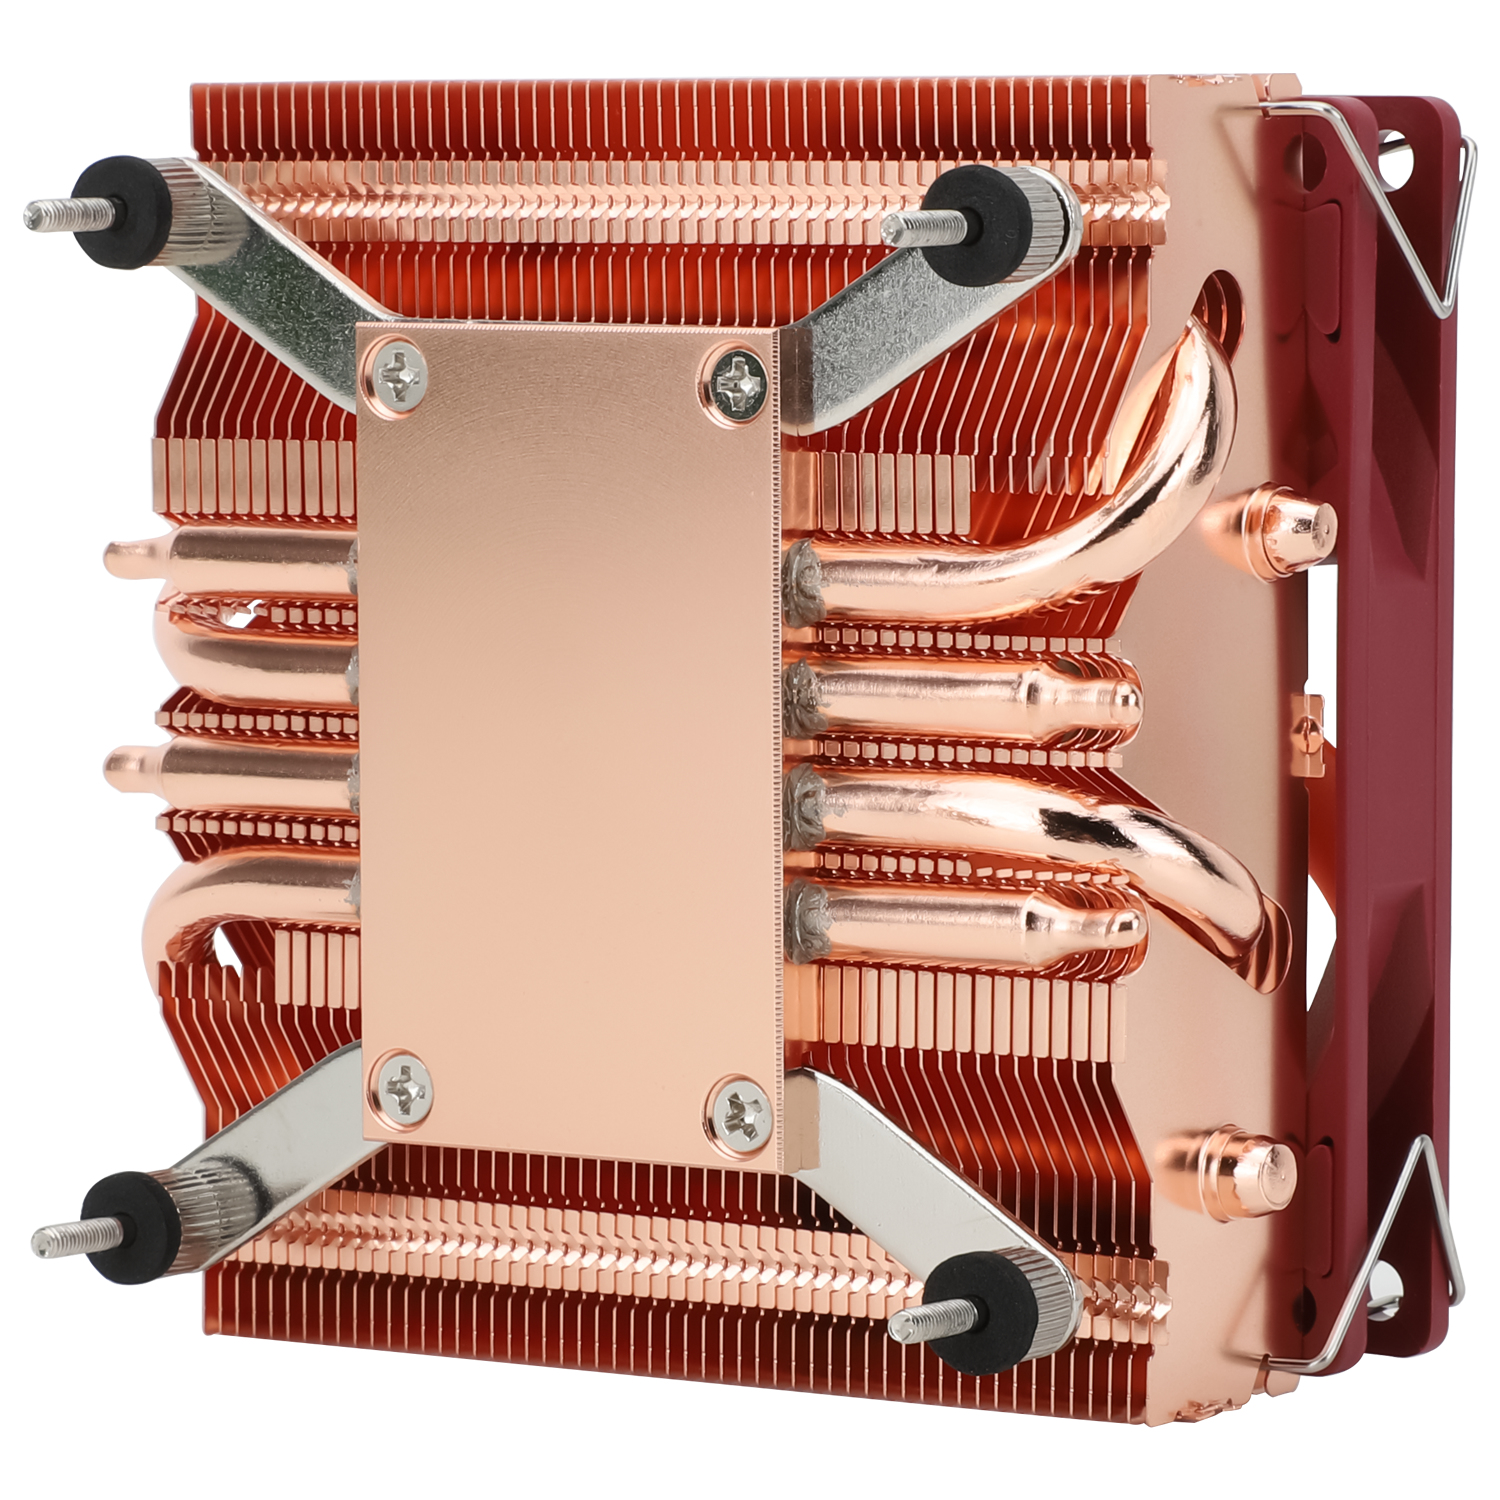 Thermalright's all-copper AXP90-53 air cooler is a blast from the